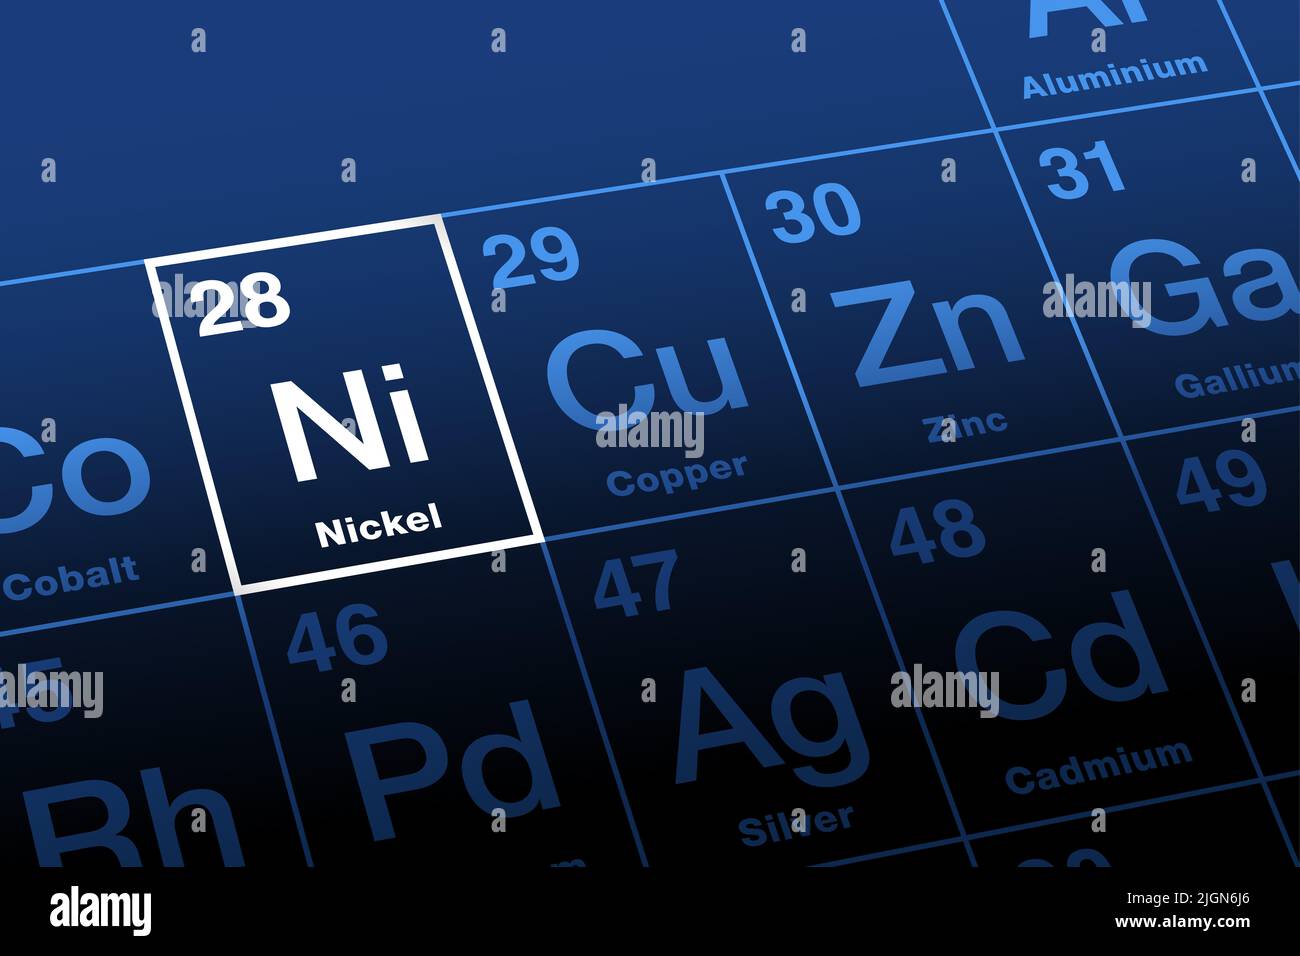 Nickel on periodic table of elements. Ferromagnetic transition metal, with the element symbol Ni, and with the atomic number 28. Stock Photo